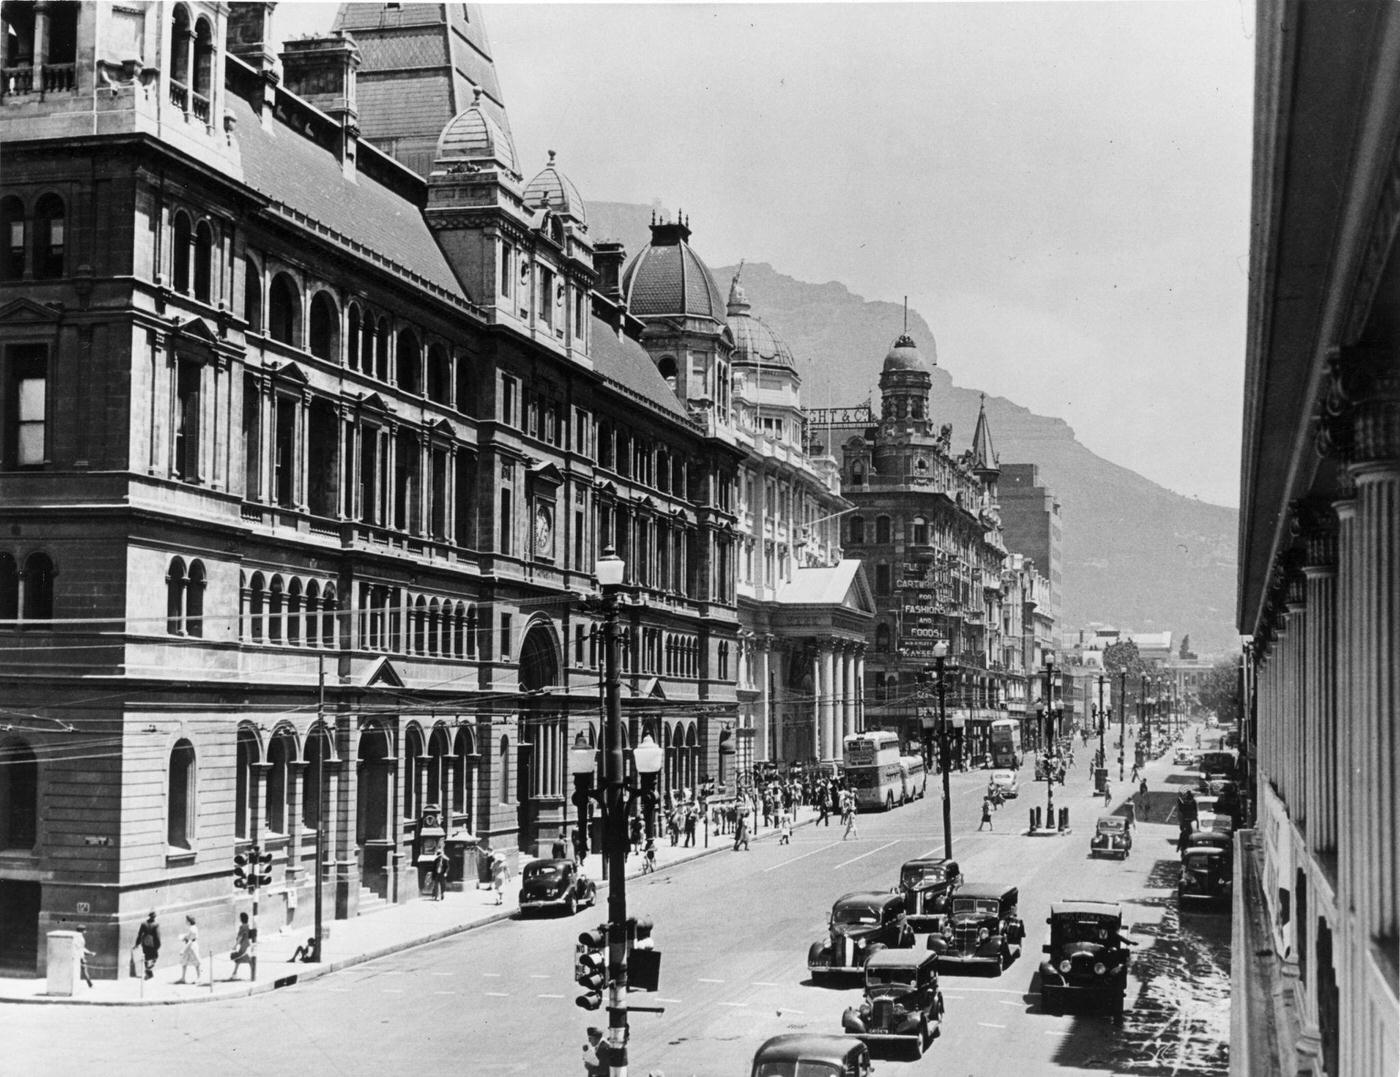 Adderly Street in Capetown, South Africa, 1947